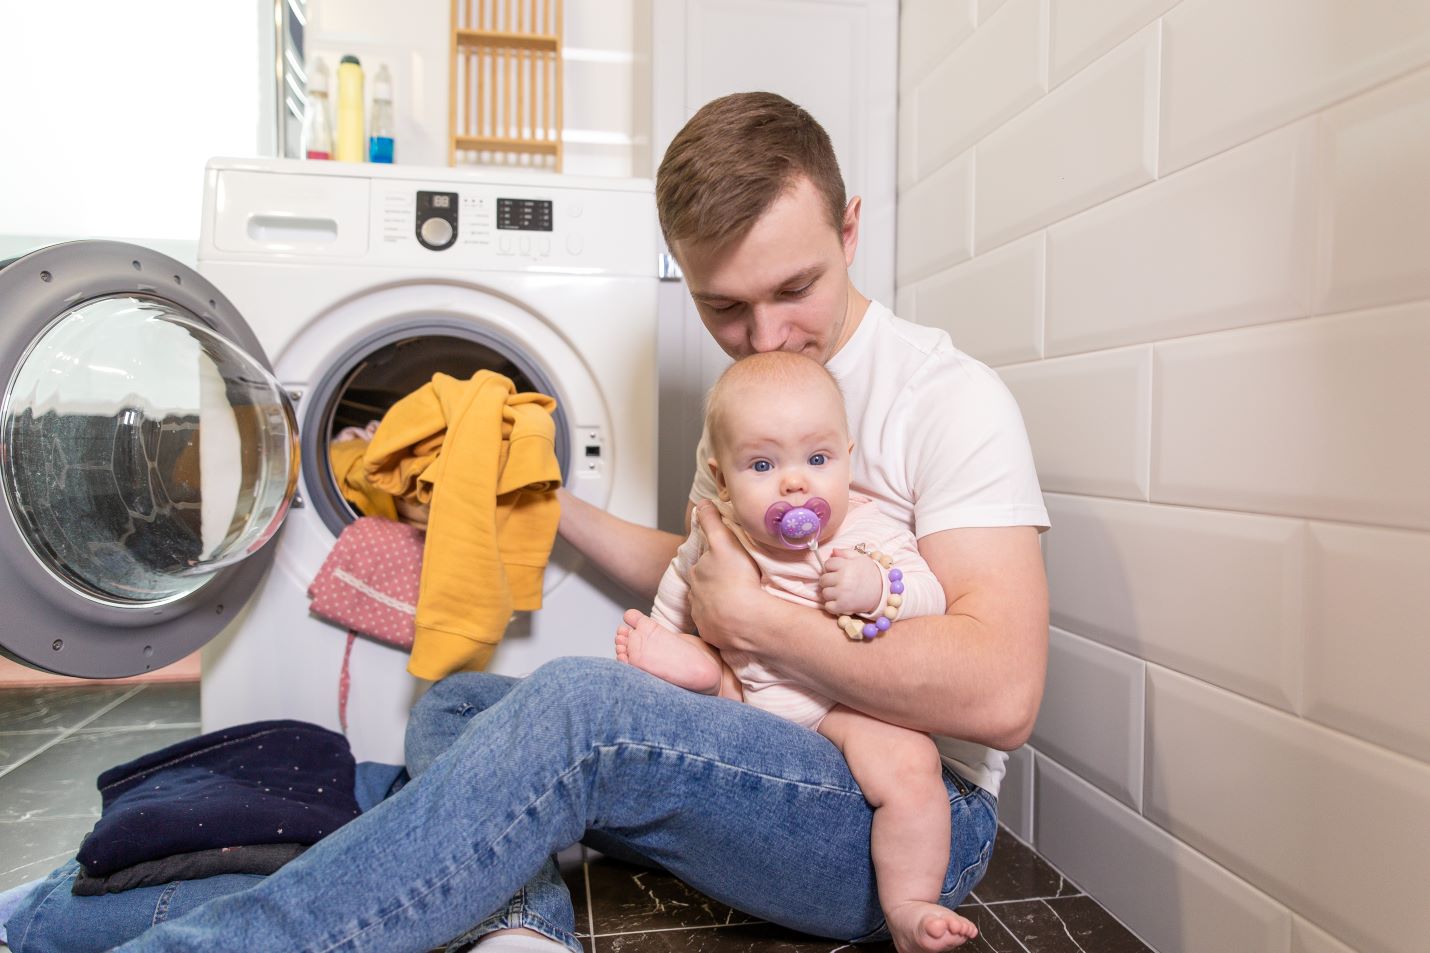 New dad holding baby while washing new baby clothes